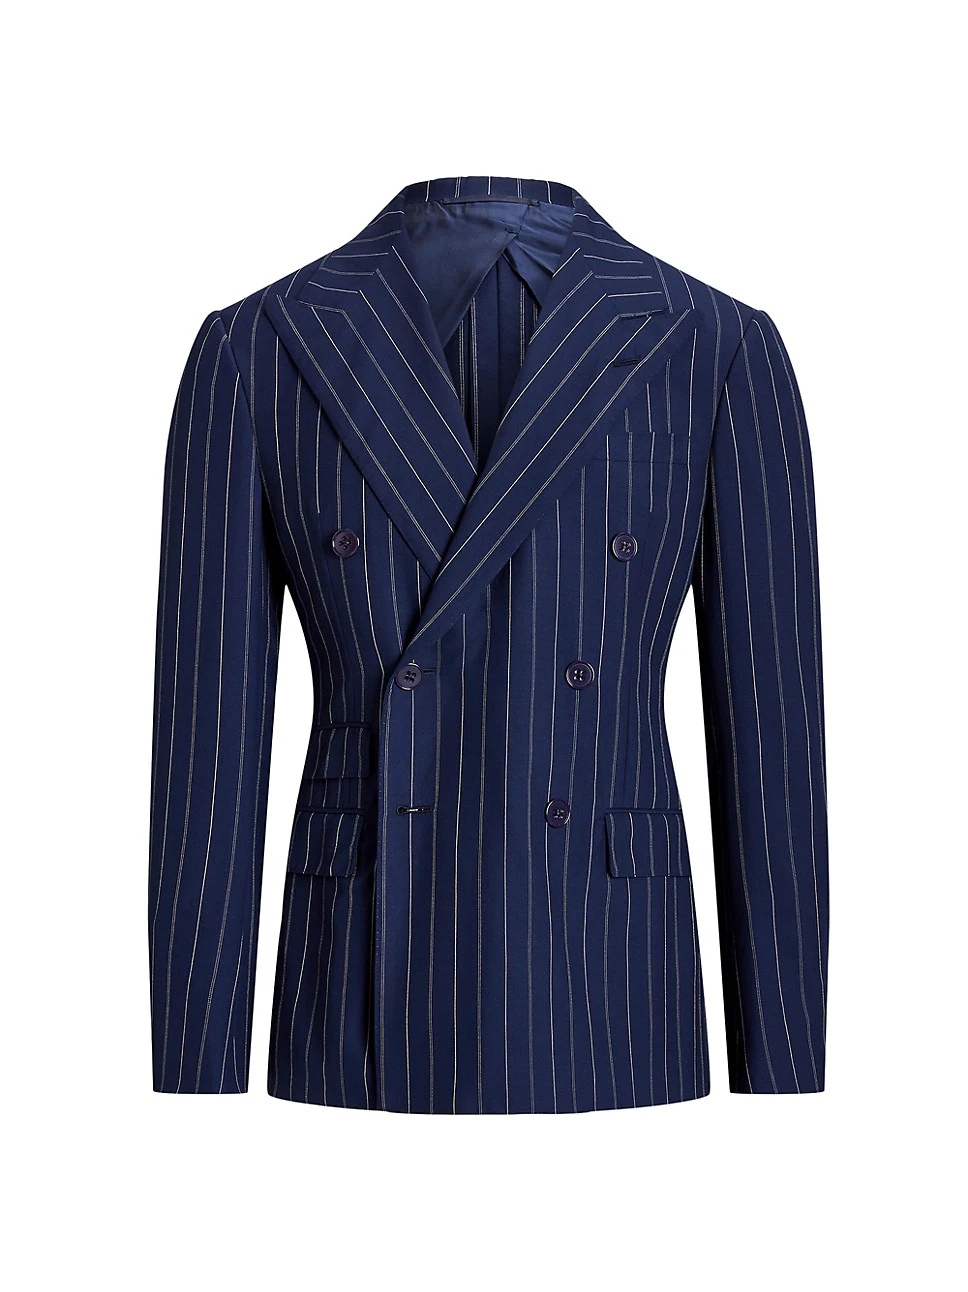 The Pinstripe Suit